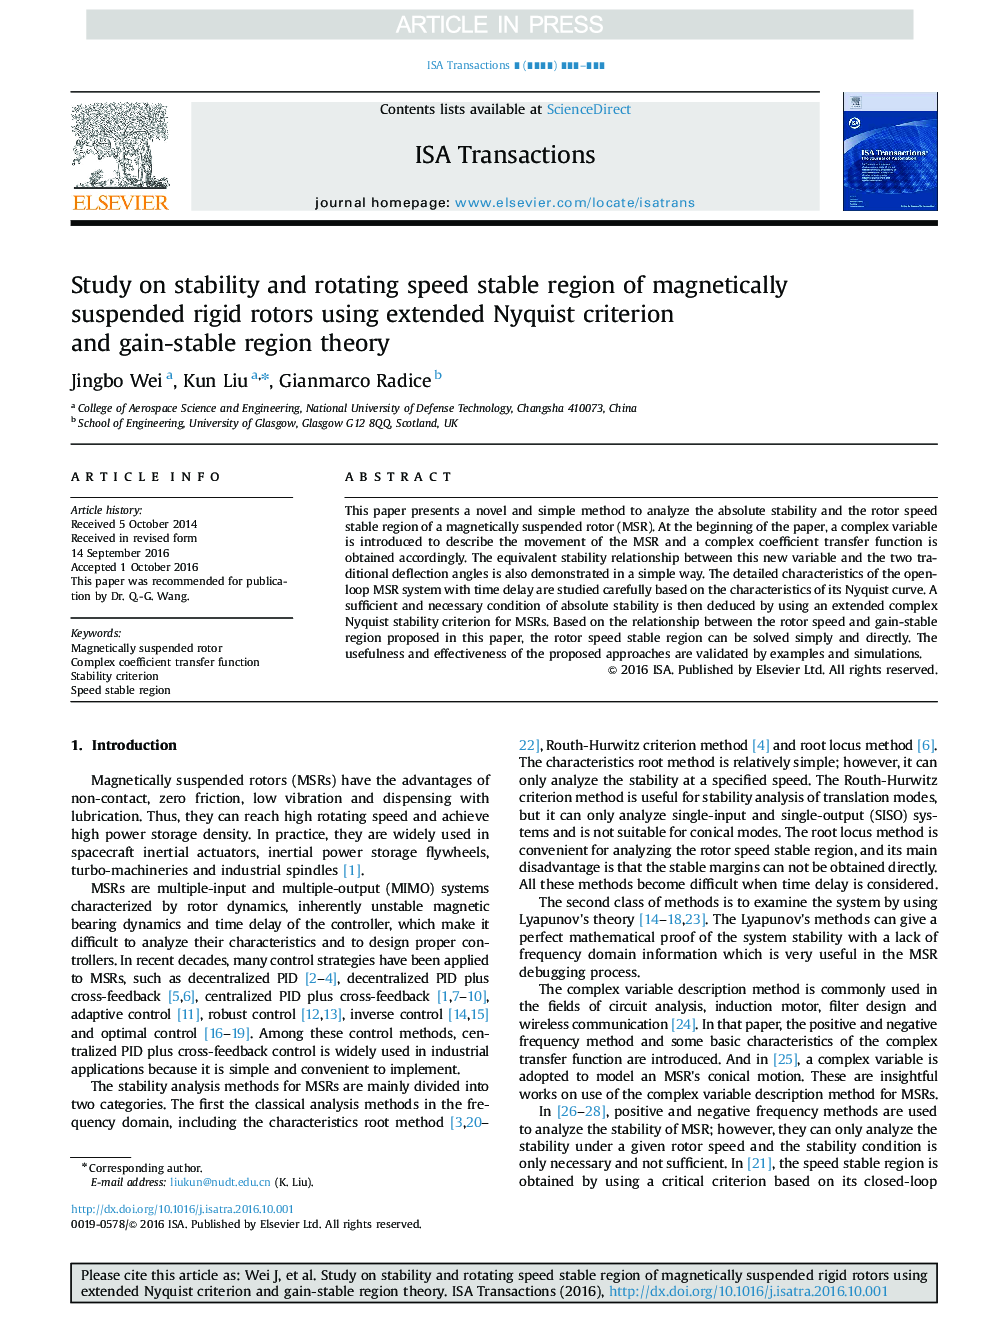 Study on stability and rotating speed stable region of magnetically suspended rigid rotors using extended Nyquist criterion and gain-stable region theory